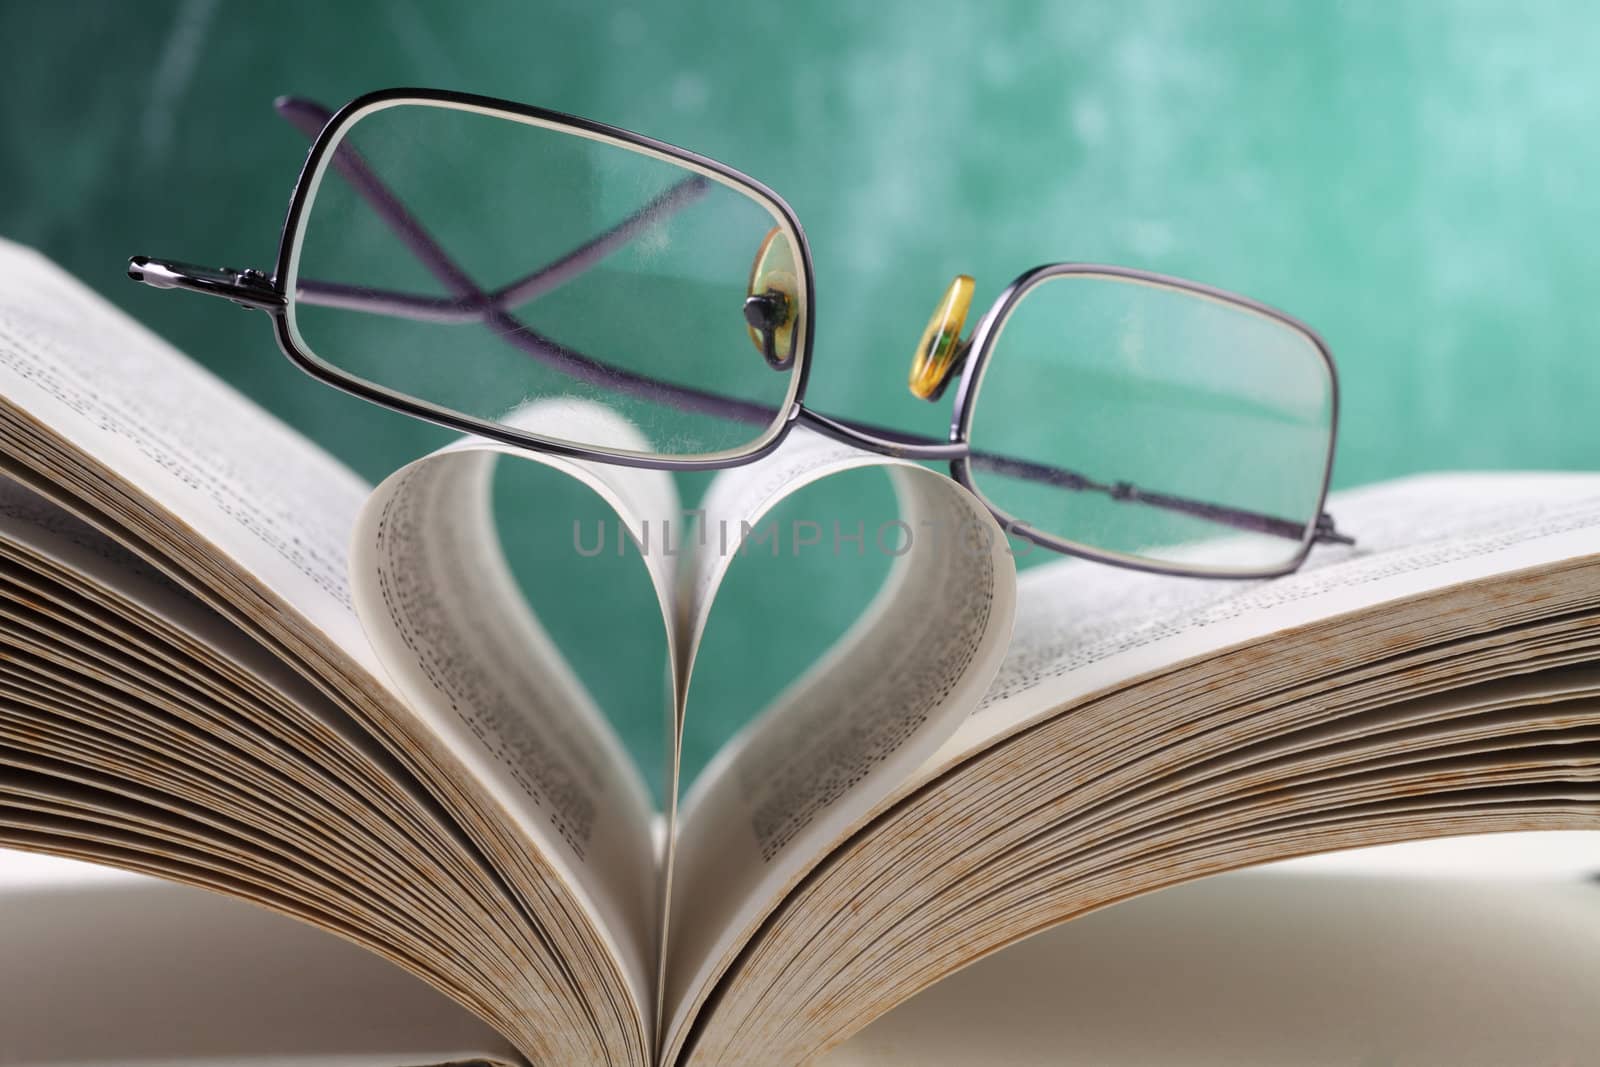 spectacels resting on book with heart shape